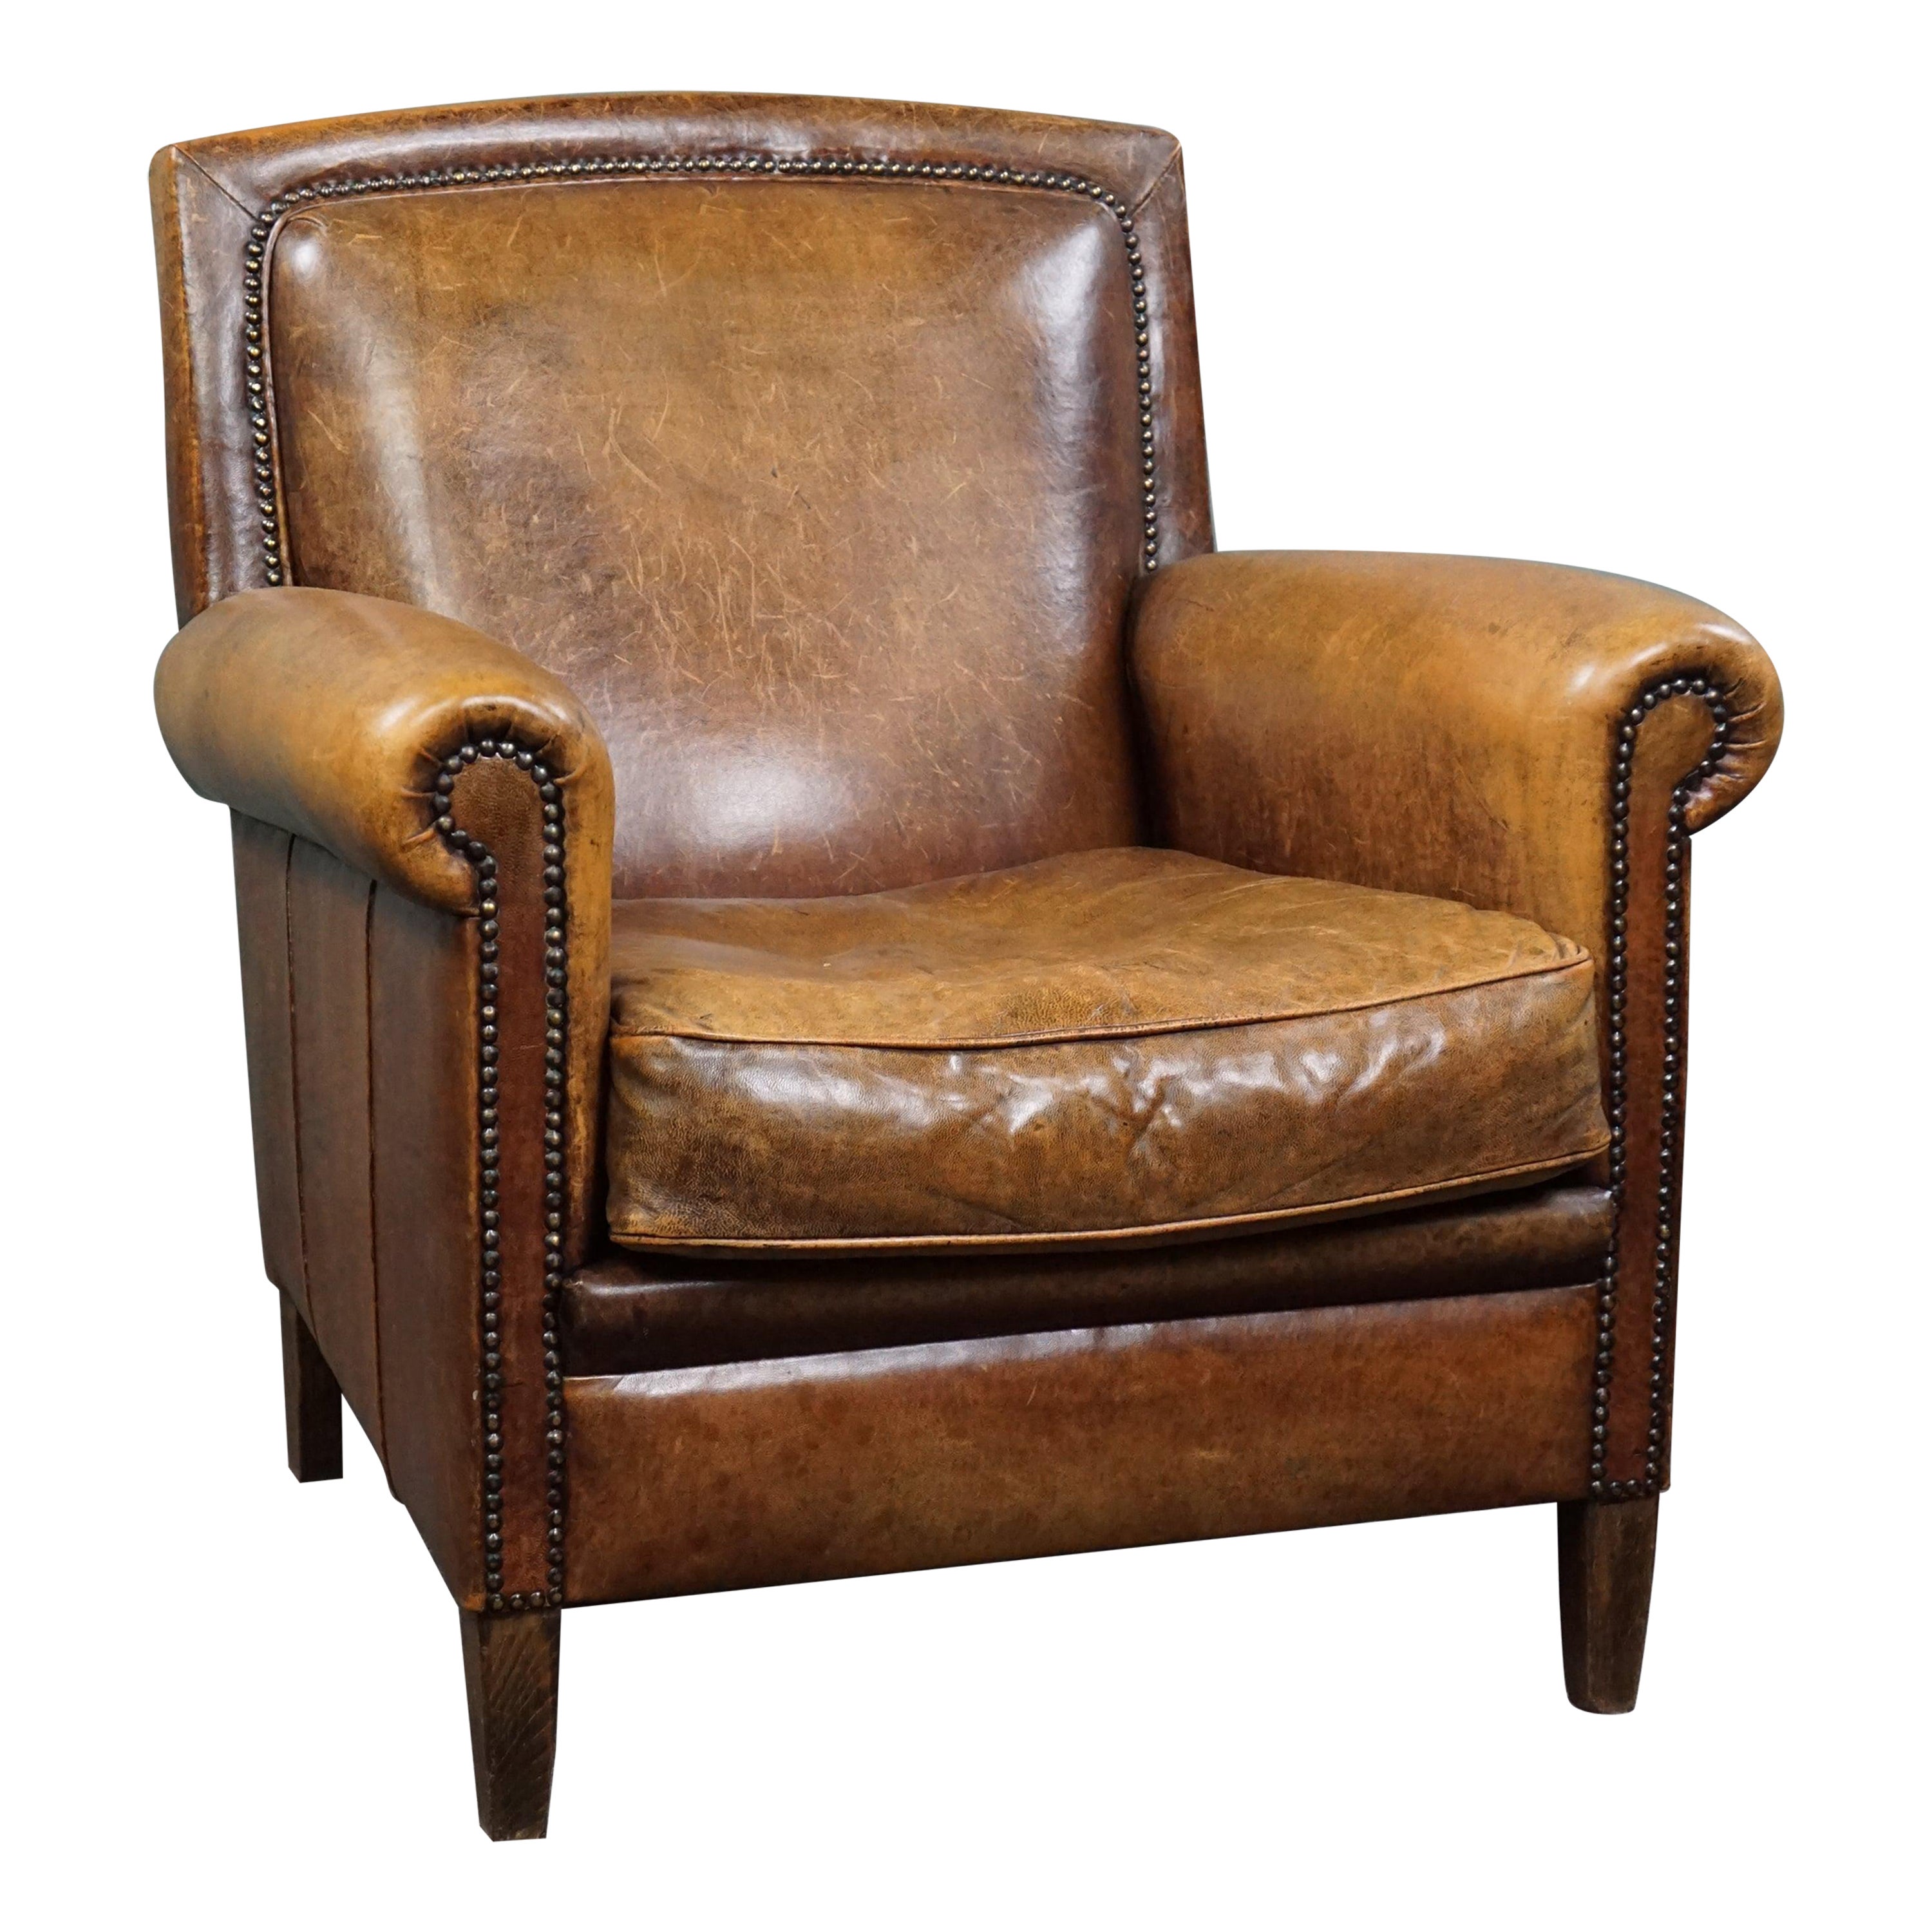 Well-fitting Sheepskin Leather Armchair/Fauteuil. For Sale